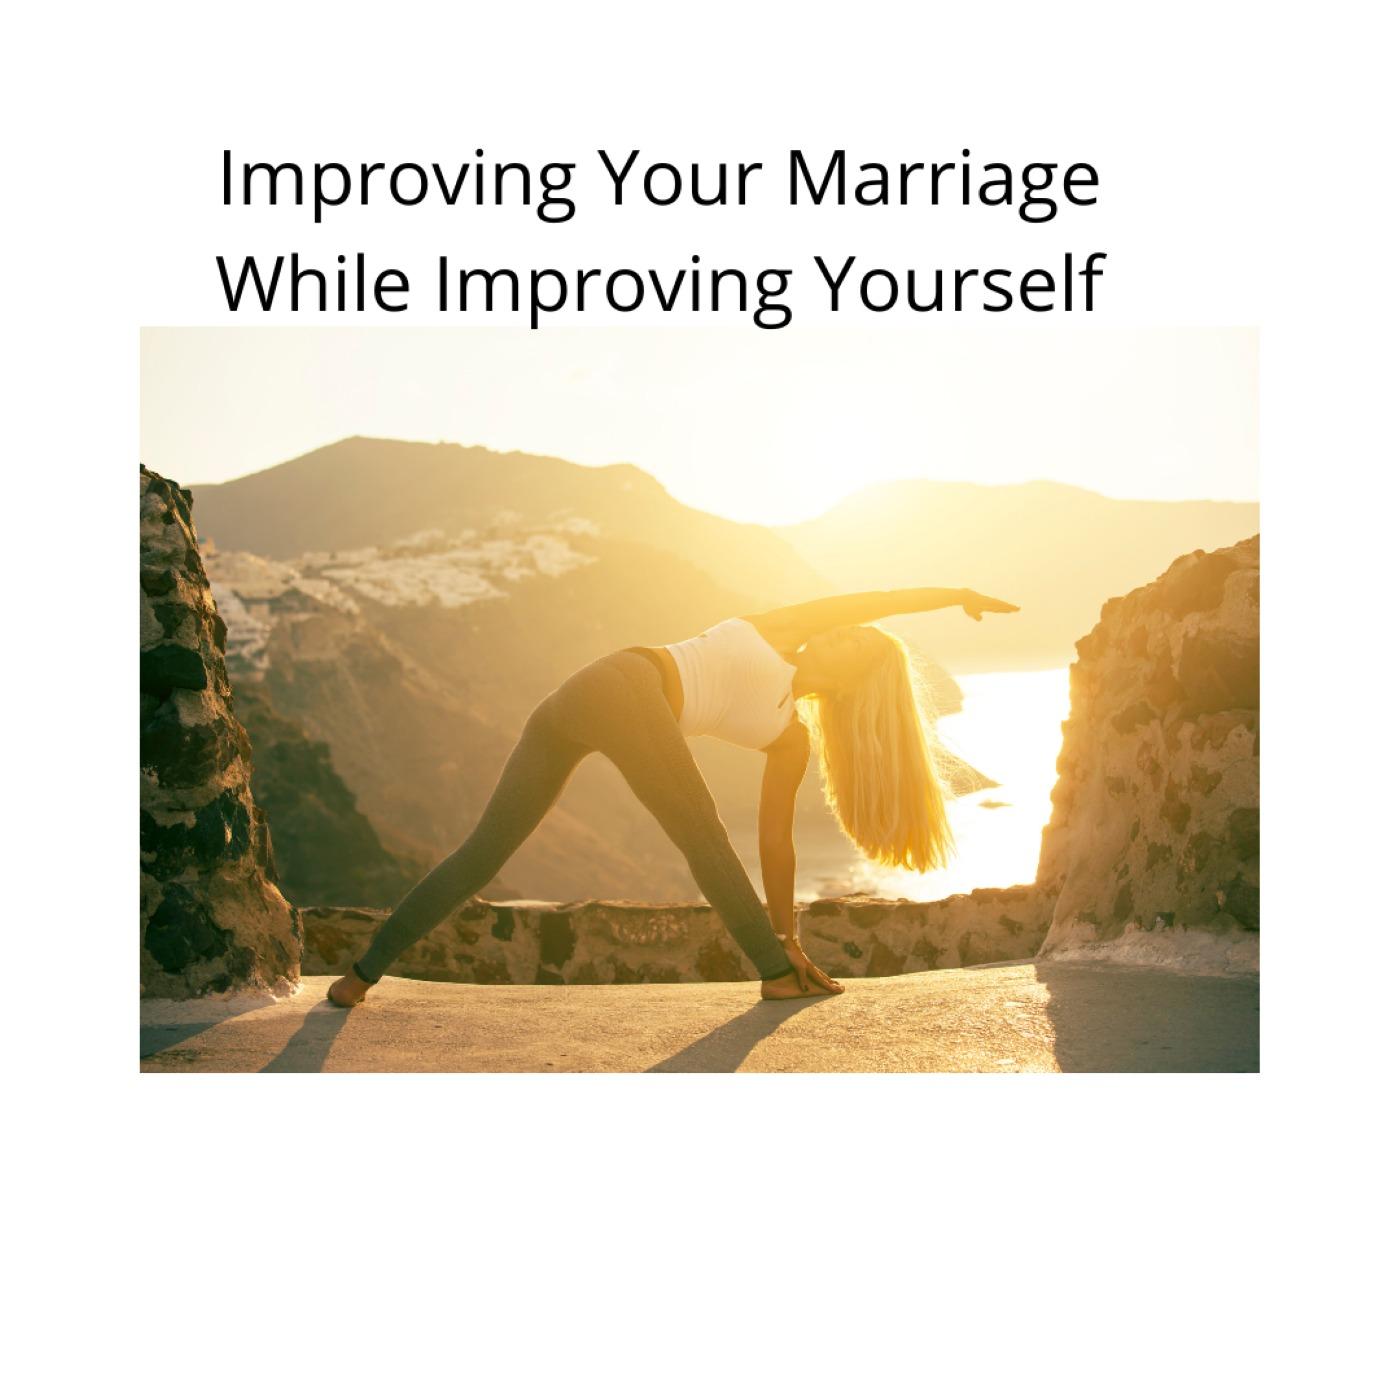 Improving Your Marriage while Improving Yourself